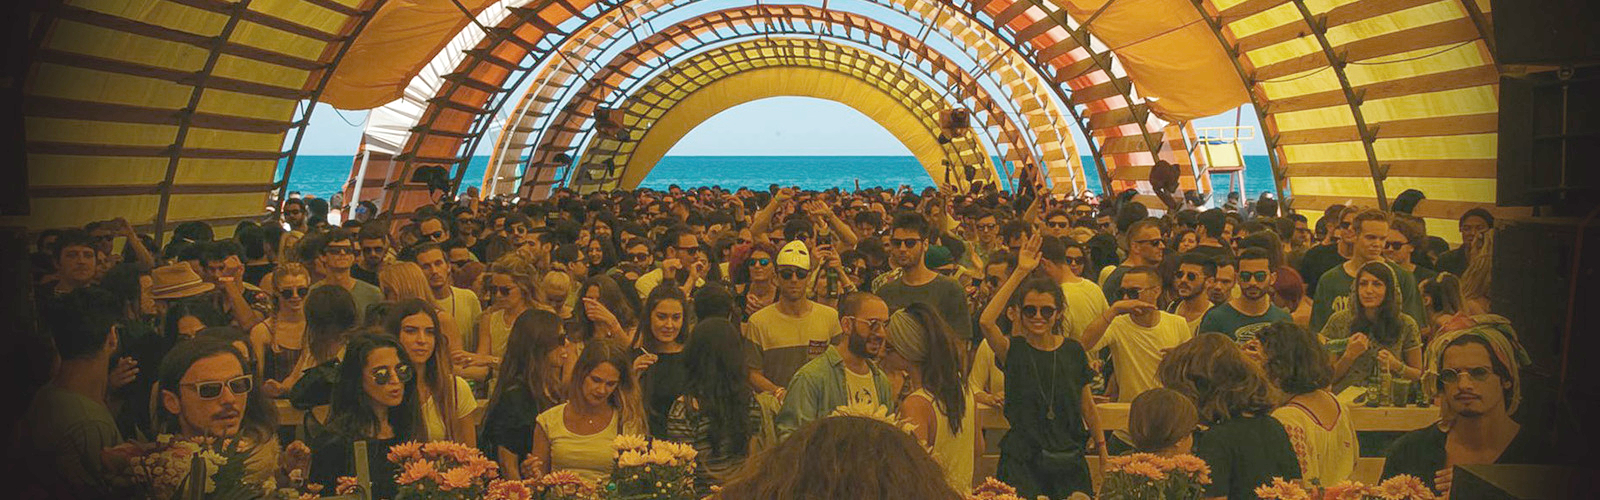 Sunwaves - one of Europe's most acclaimed festivals